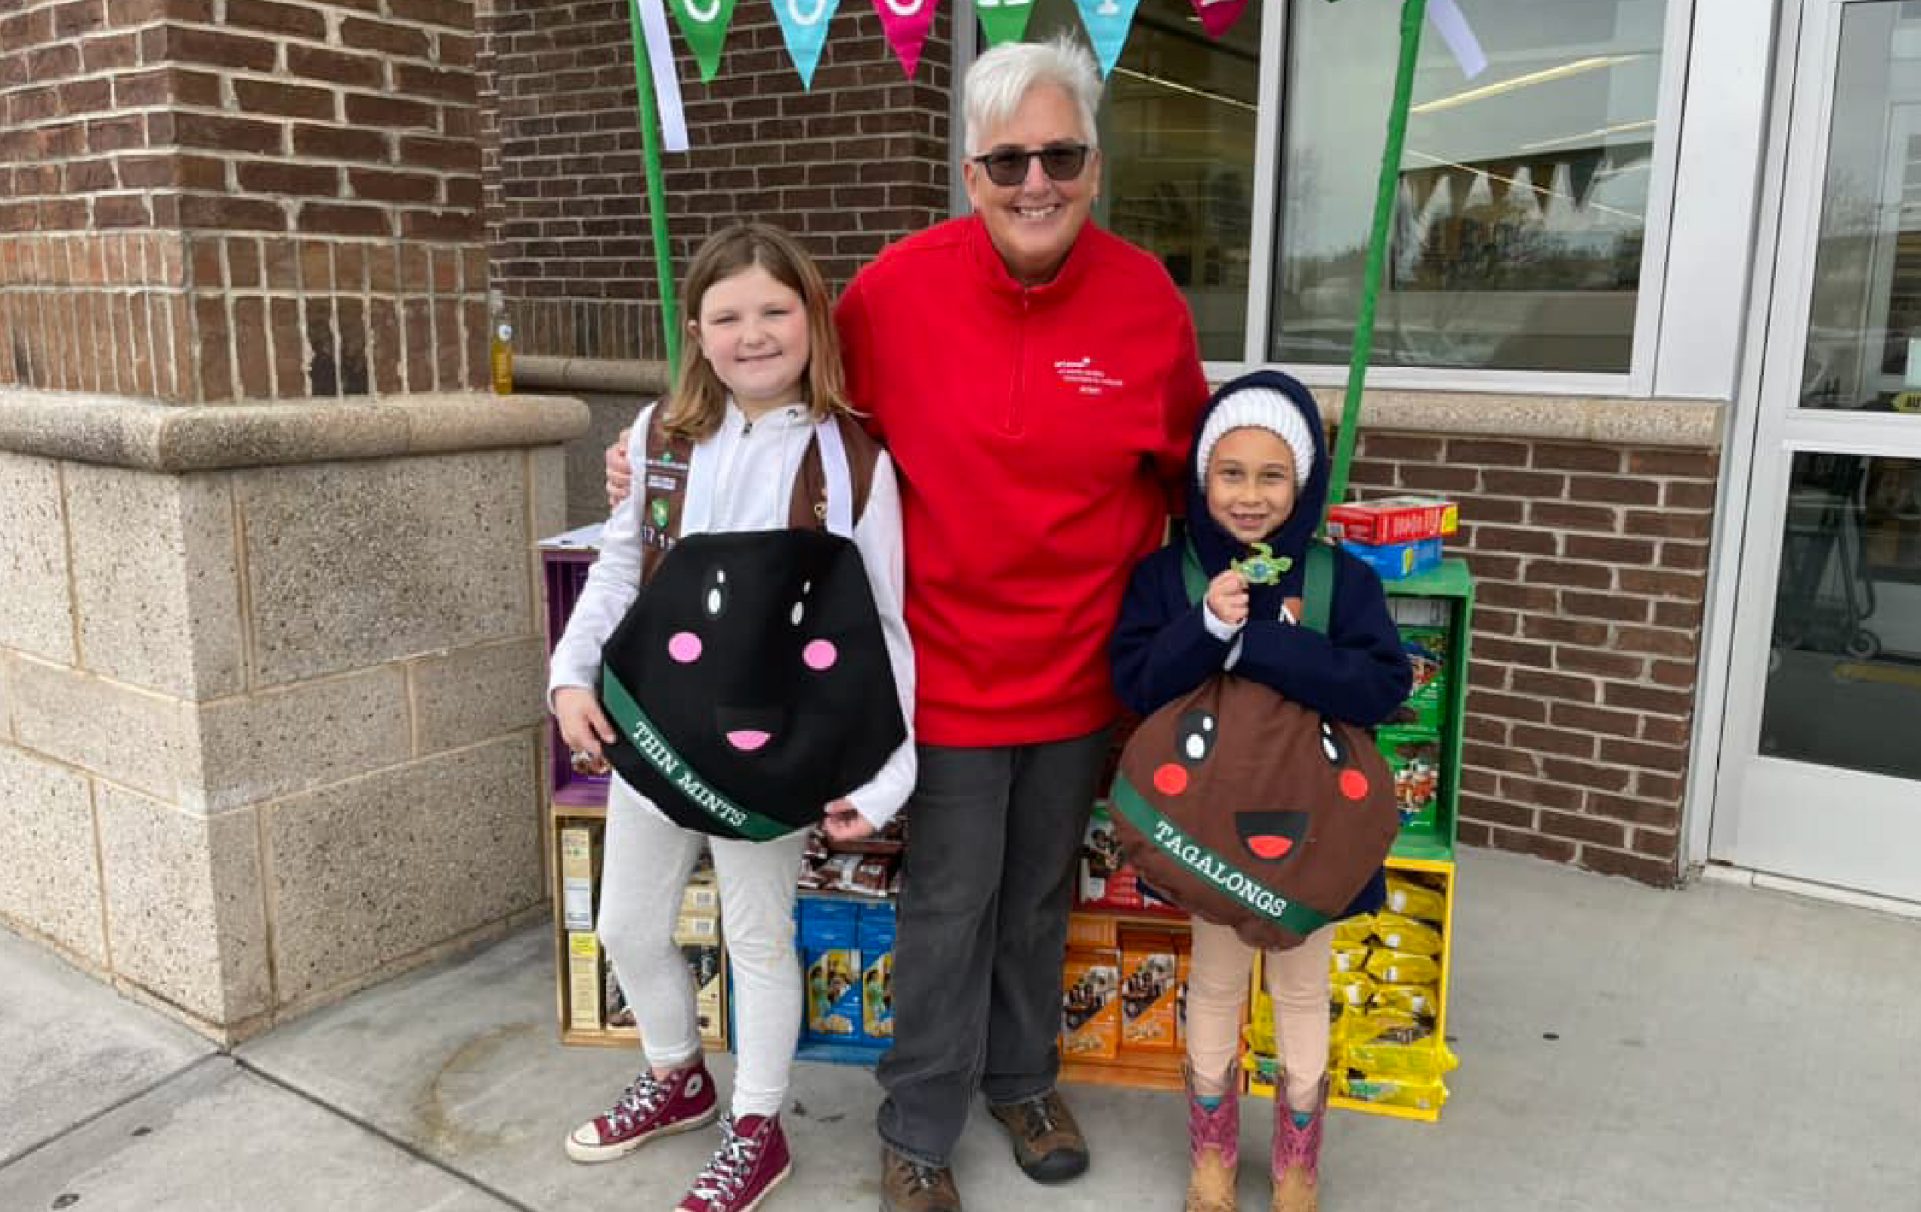 CEO Lora poses with Girl Scouts dressed as a Thin Mint and a Tagalong at a booth.